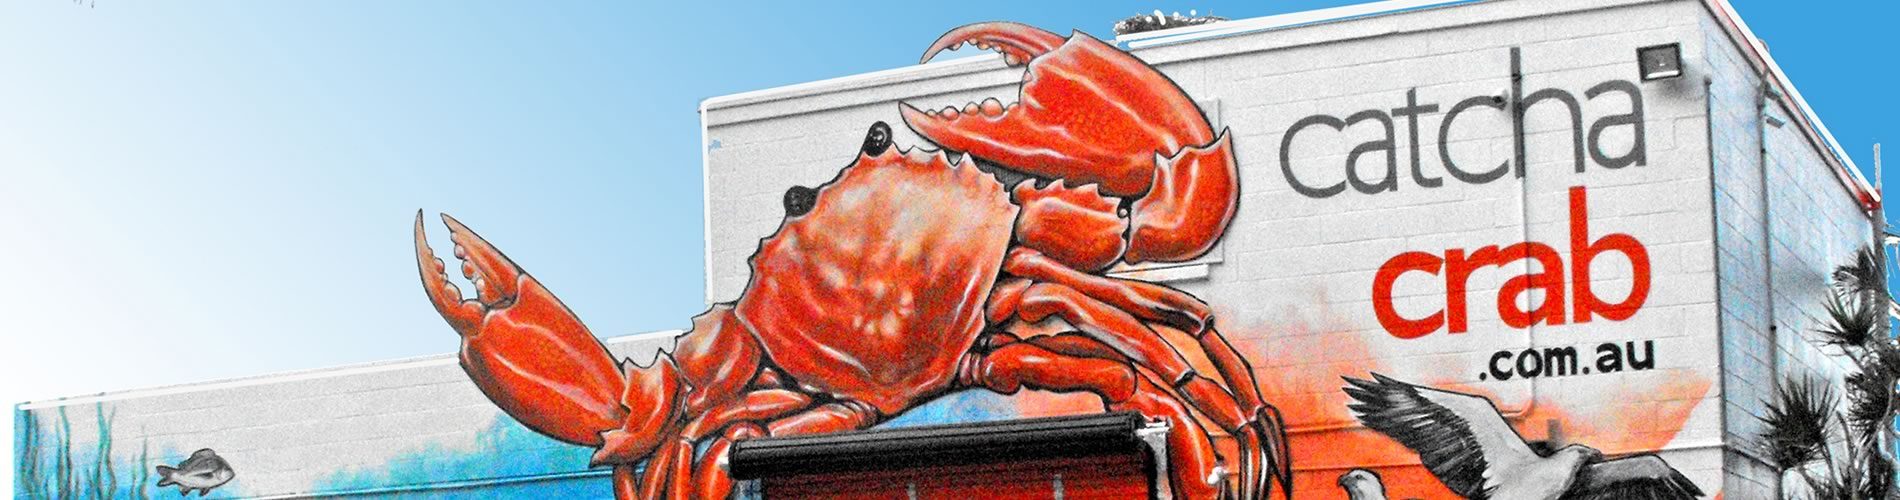 Giant crab mural at Tweed Heads Oyster Farm